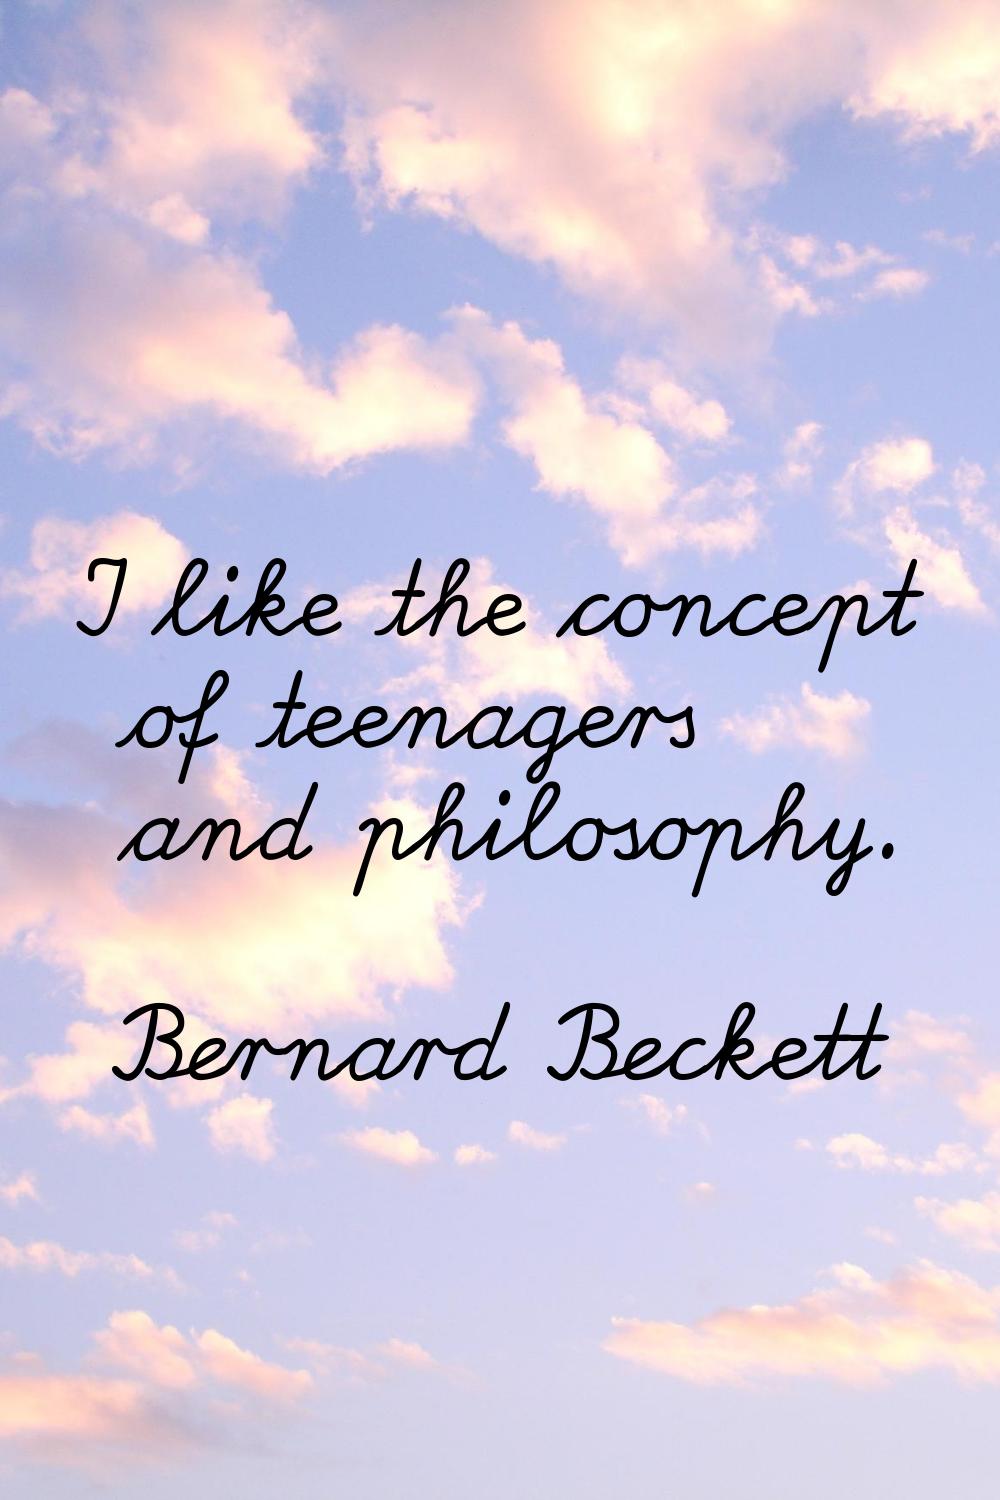 I like the concept of teenagers and philosophy.